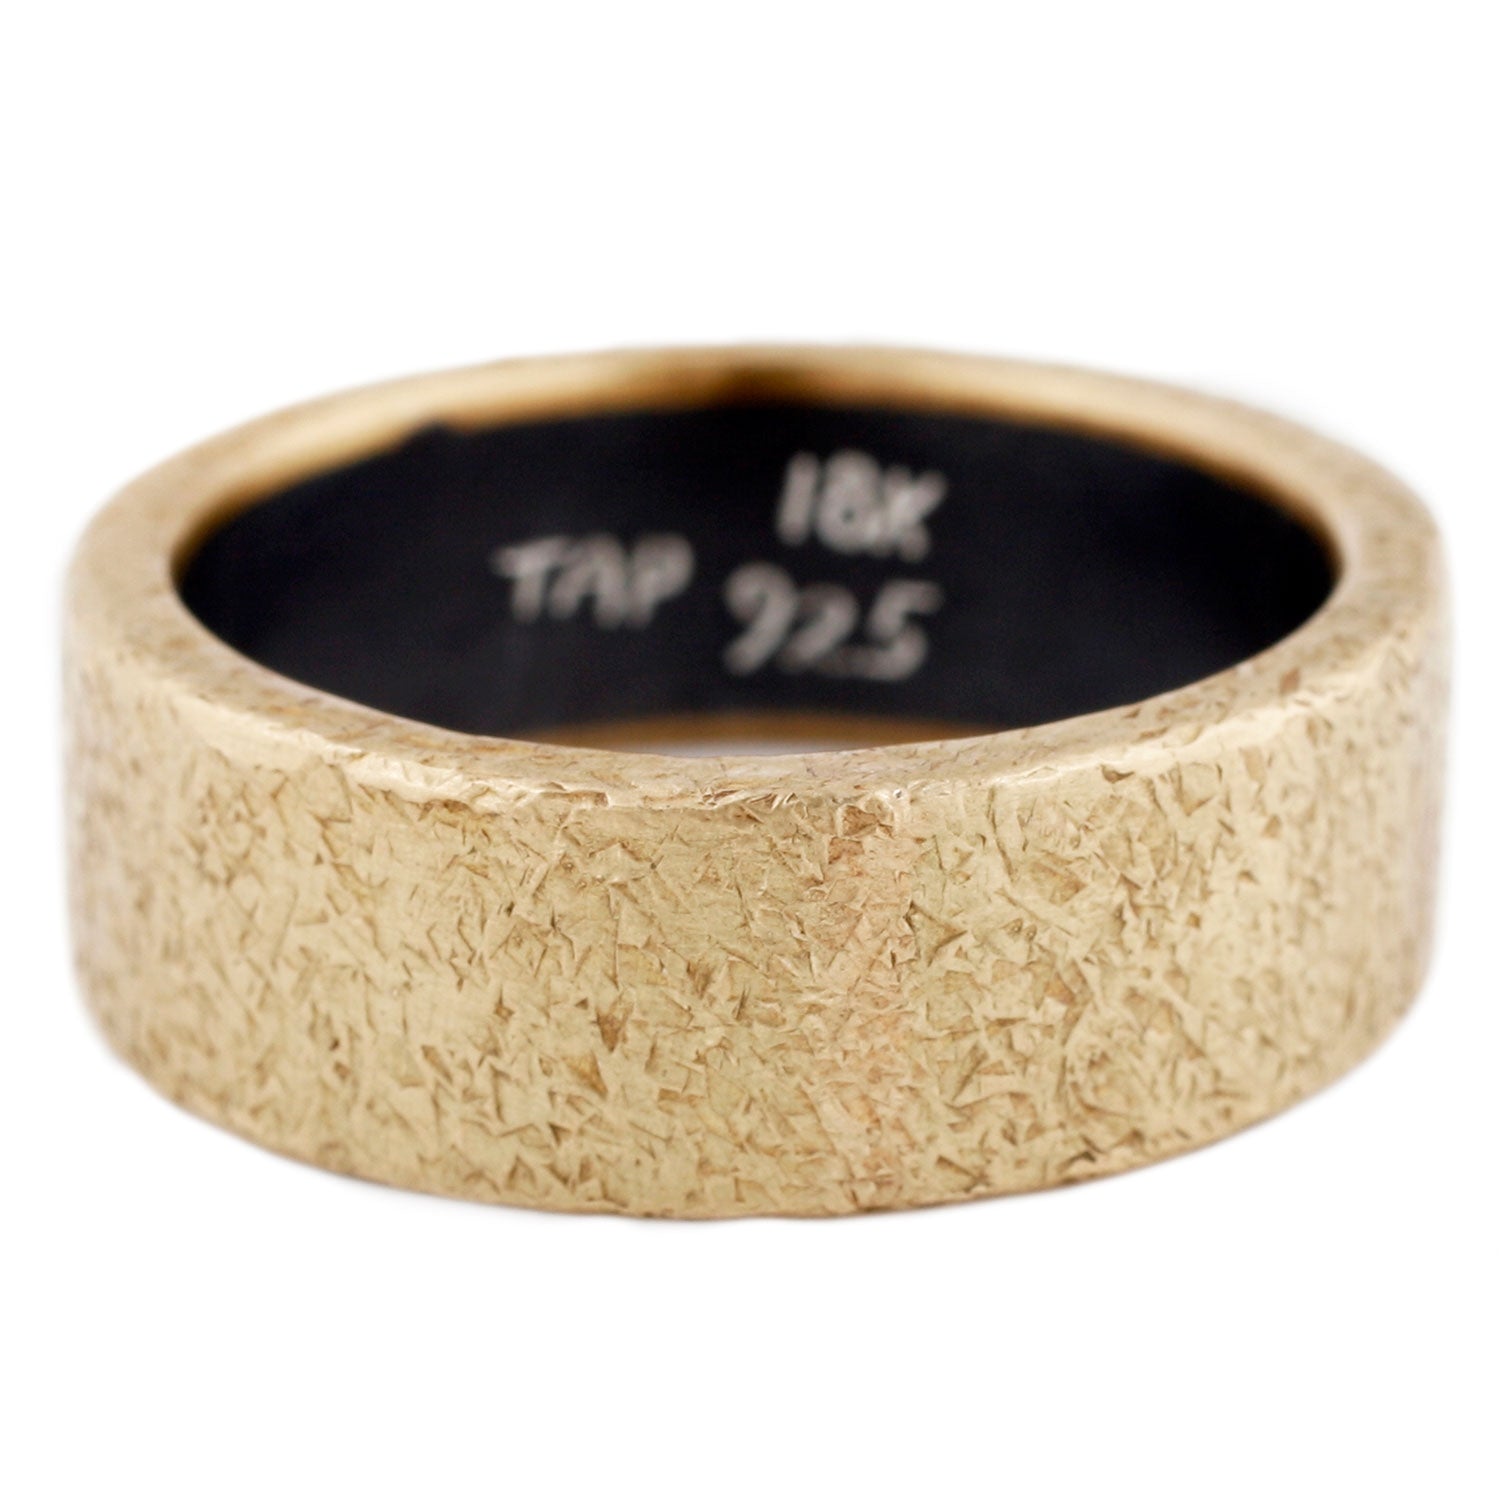 TAP by Todd Pownell Rust Band ring